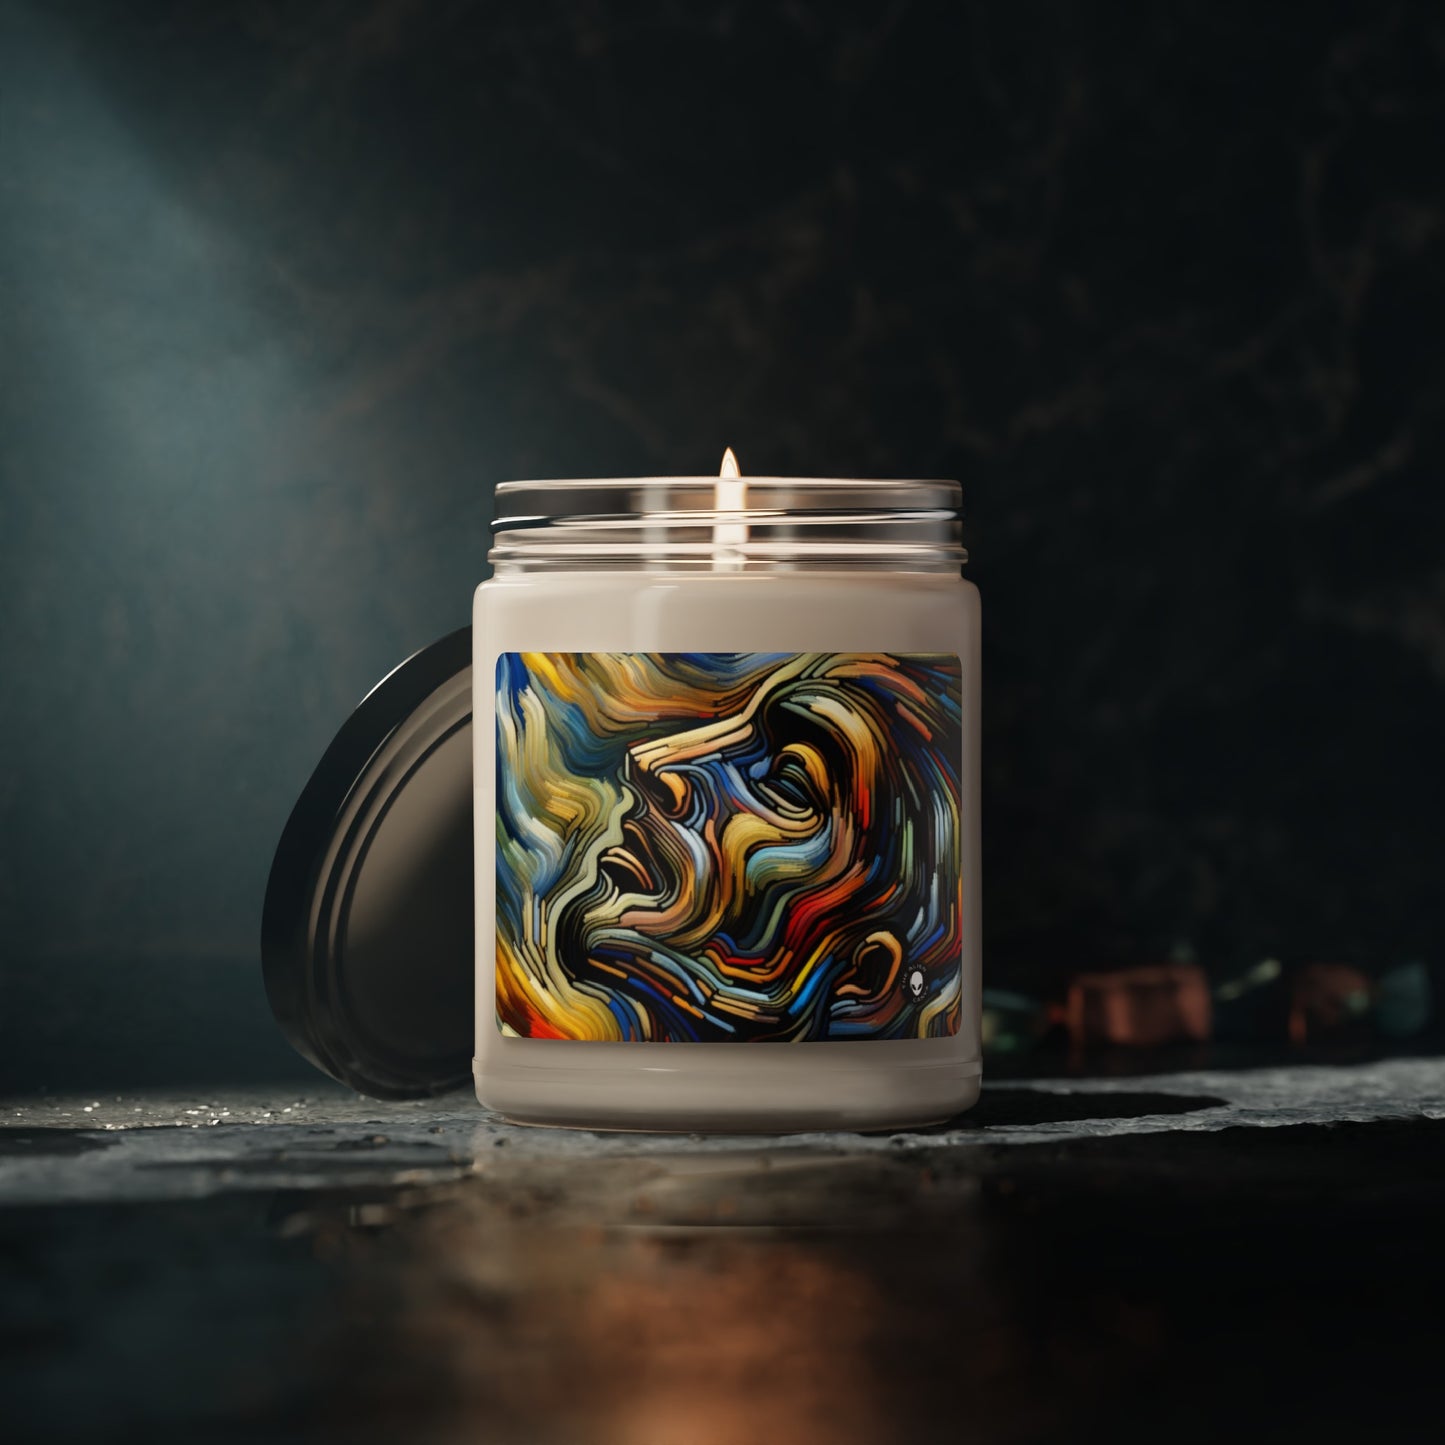 Title: "Tempestuous Waters" - The Alien Scented Soy Candle 9oz Expressionism